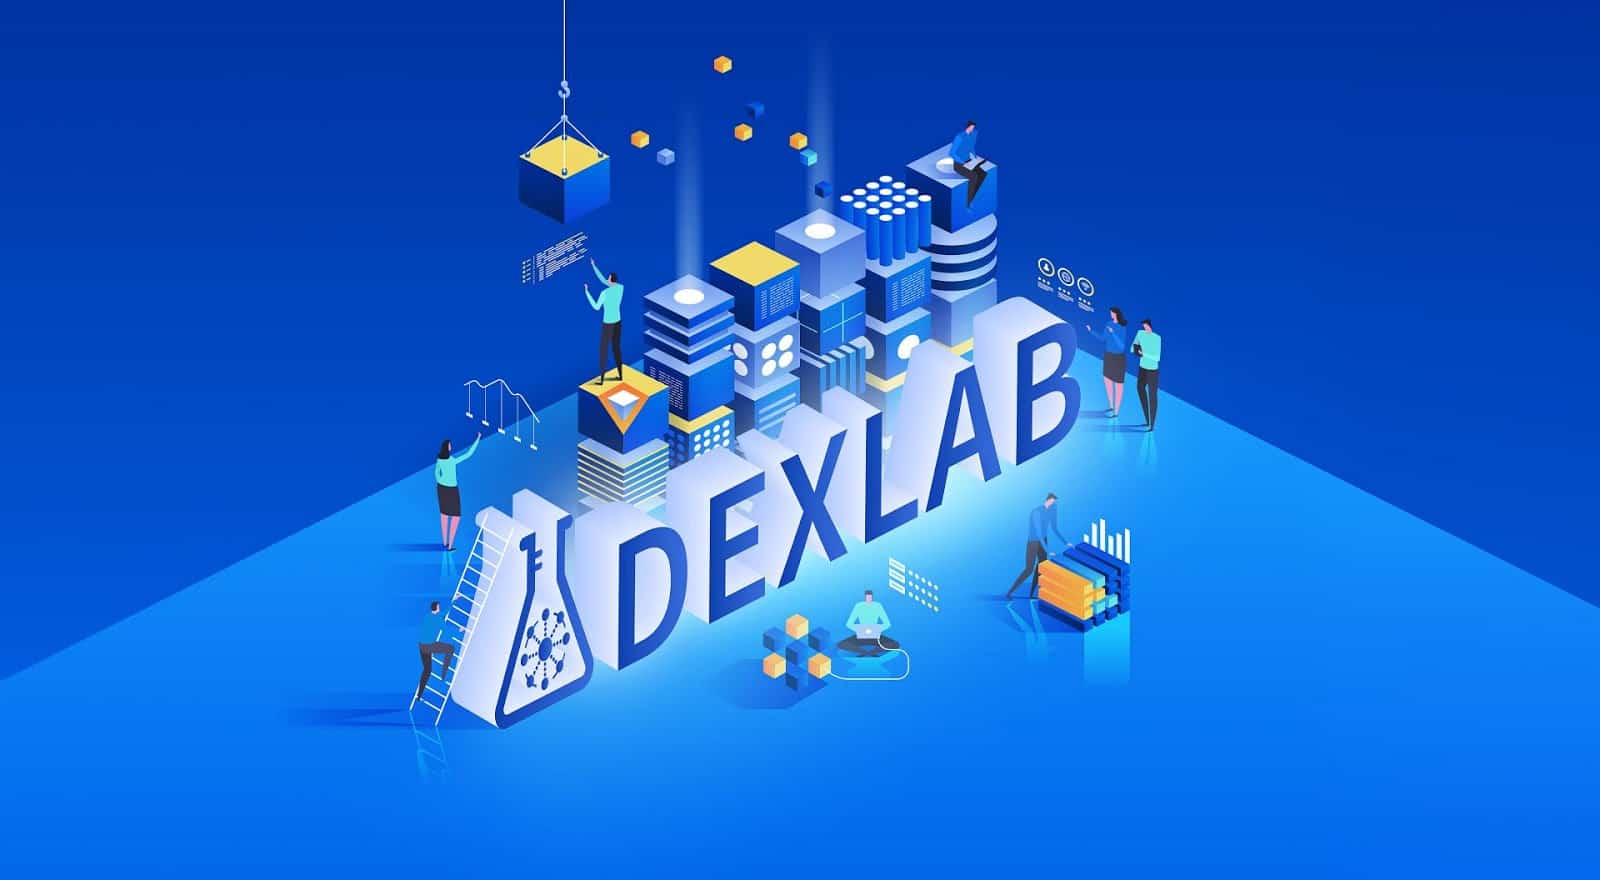 Dexlab-raises-$1.44m-to-develop-solana-gateway-and-token-launchpad